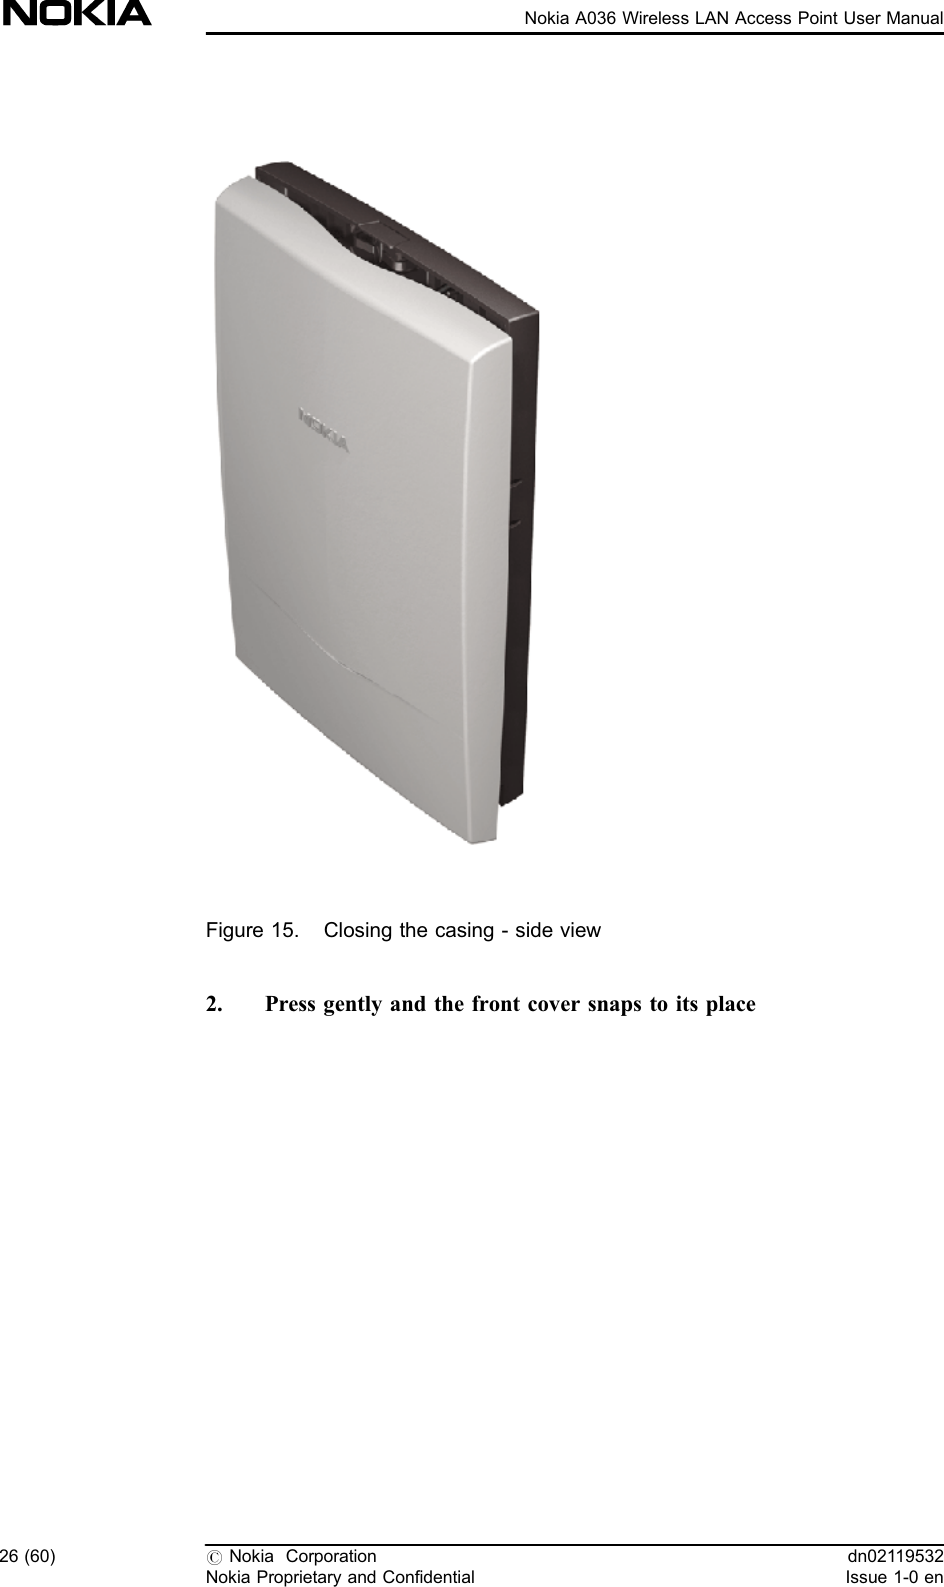 Figure 15. Closing the casing - side view2. Press gently and the front cover snaps to its place26 (60) #Nokia CorporationNokia Proprietary and Confidentialdn02119532Issue 1-0 enNokia A036 Wireless LAN Access Point User Manual